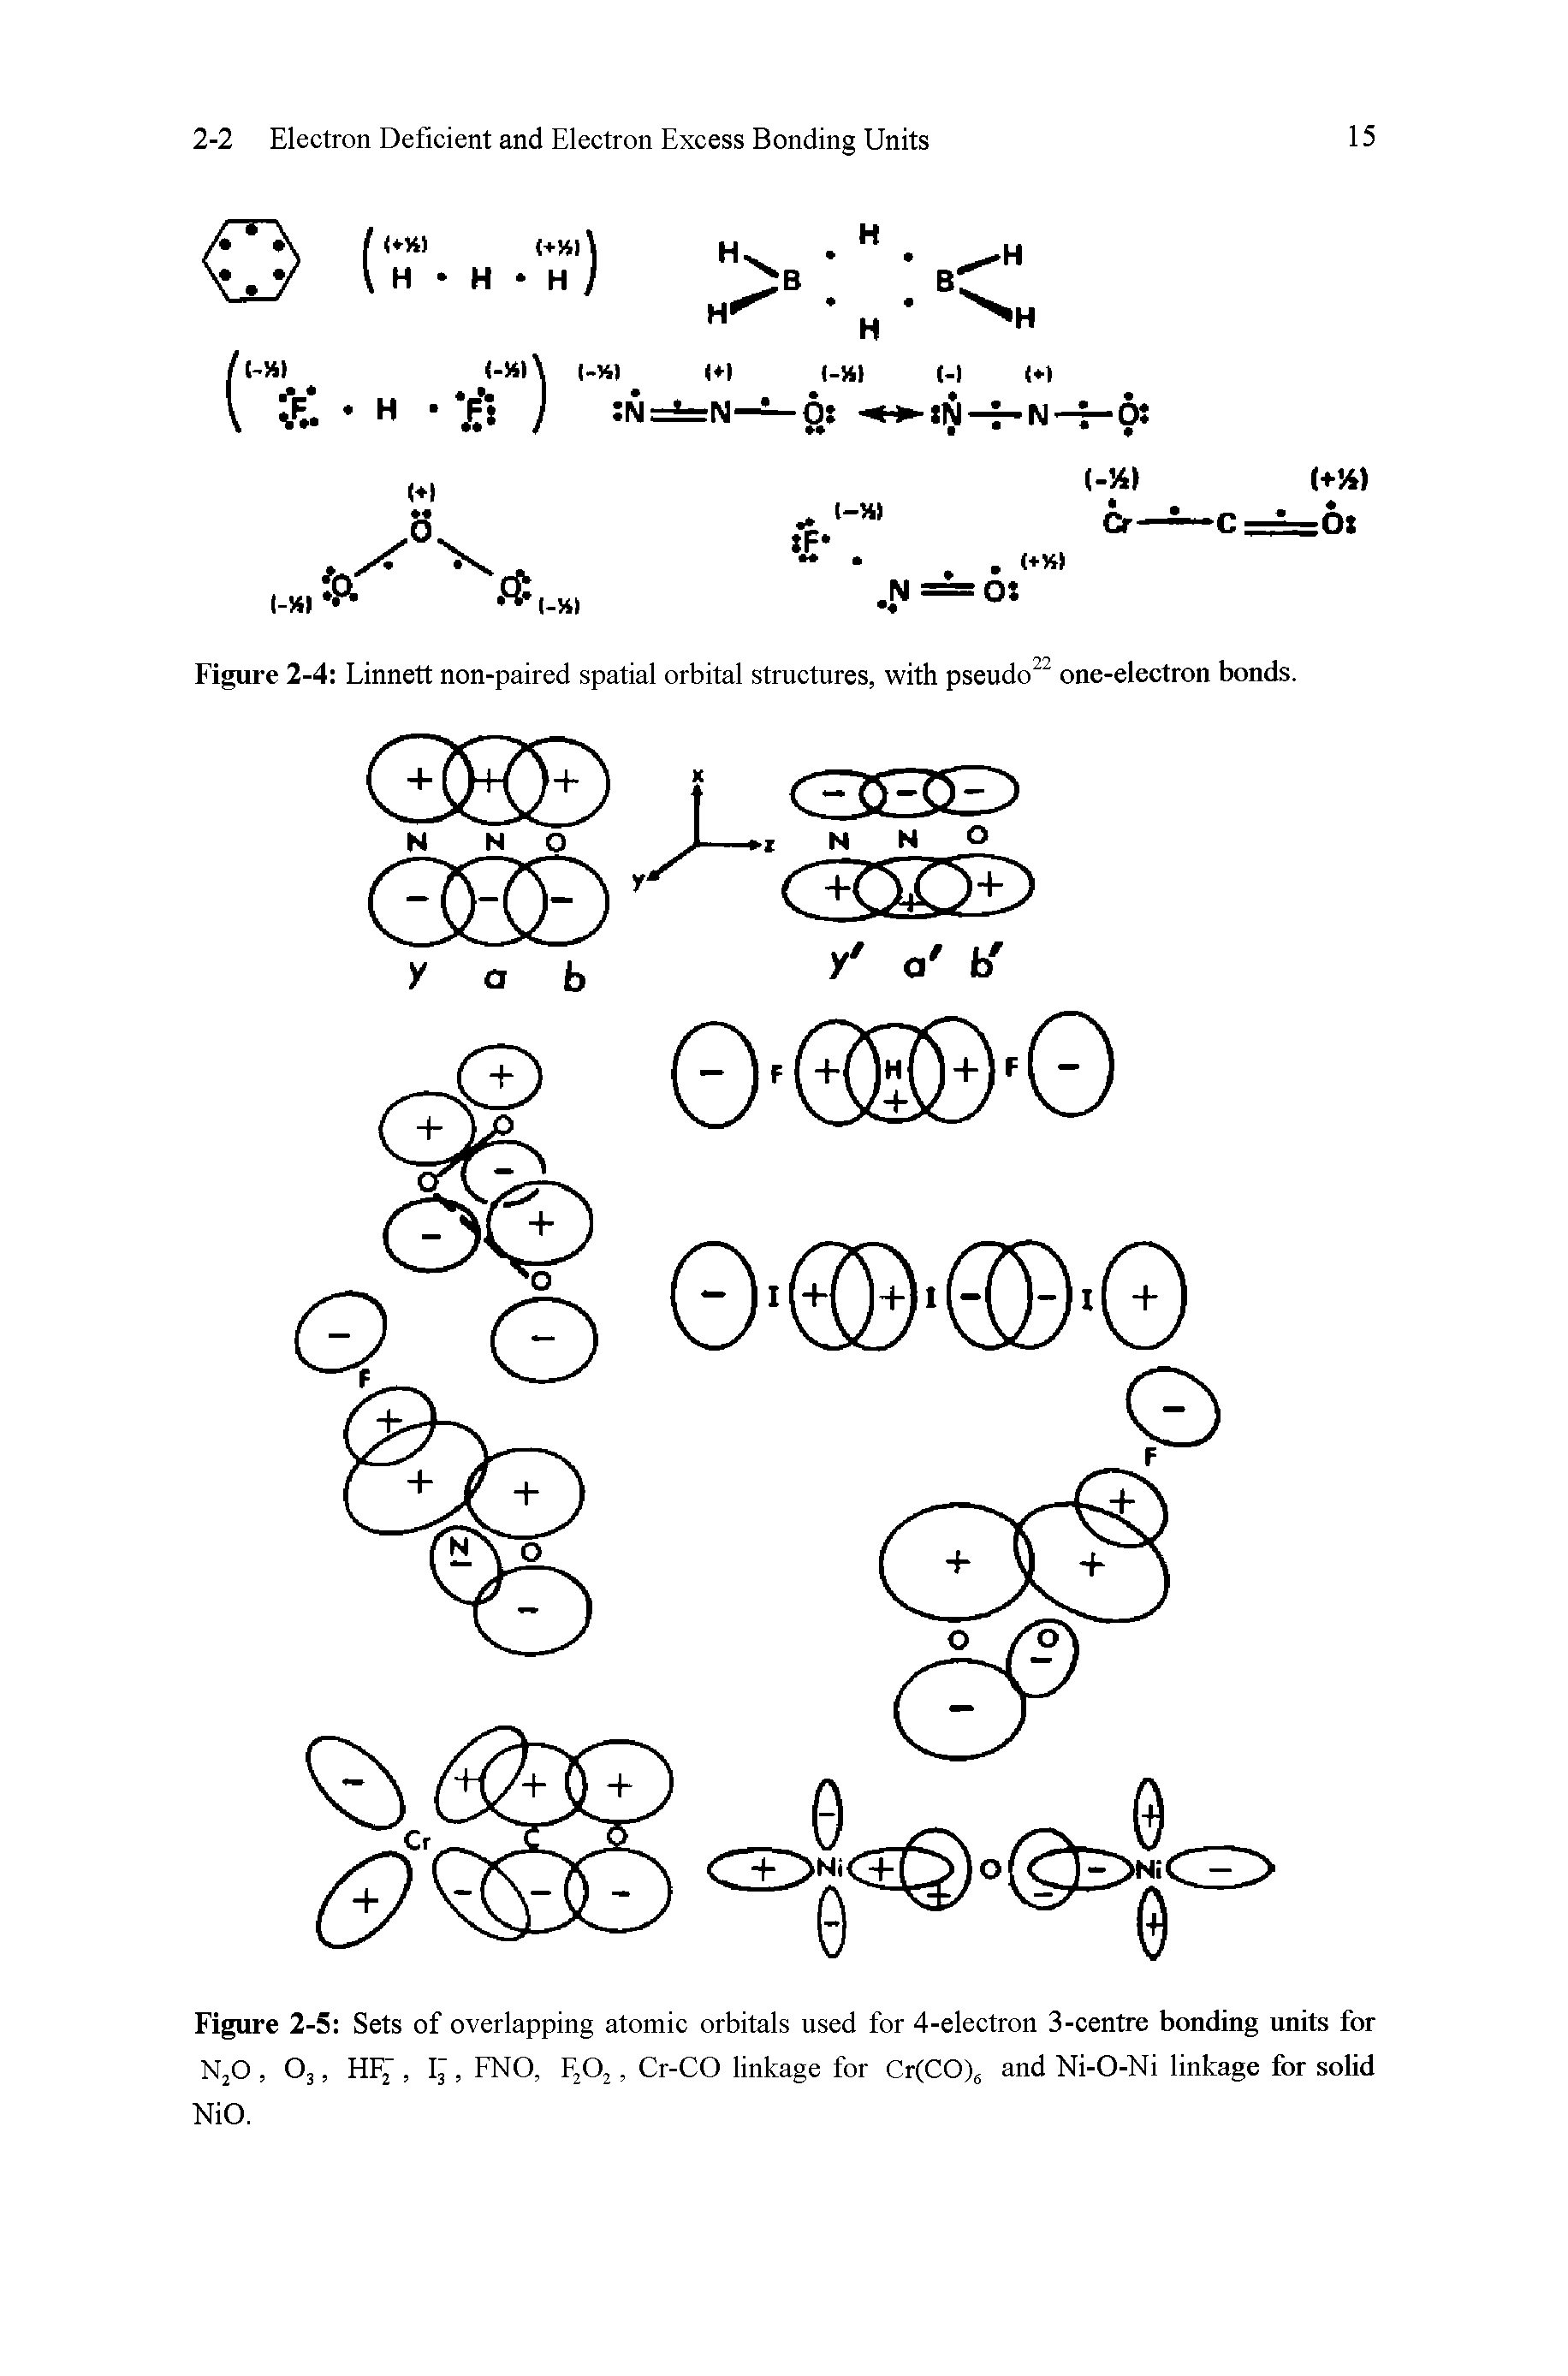 Figure 2-4 Linnett non-paired spatial orbital structures, with pseudo one-electron bonds.